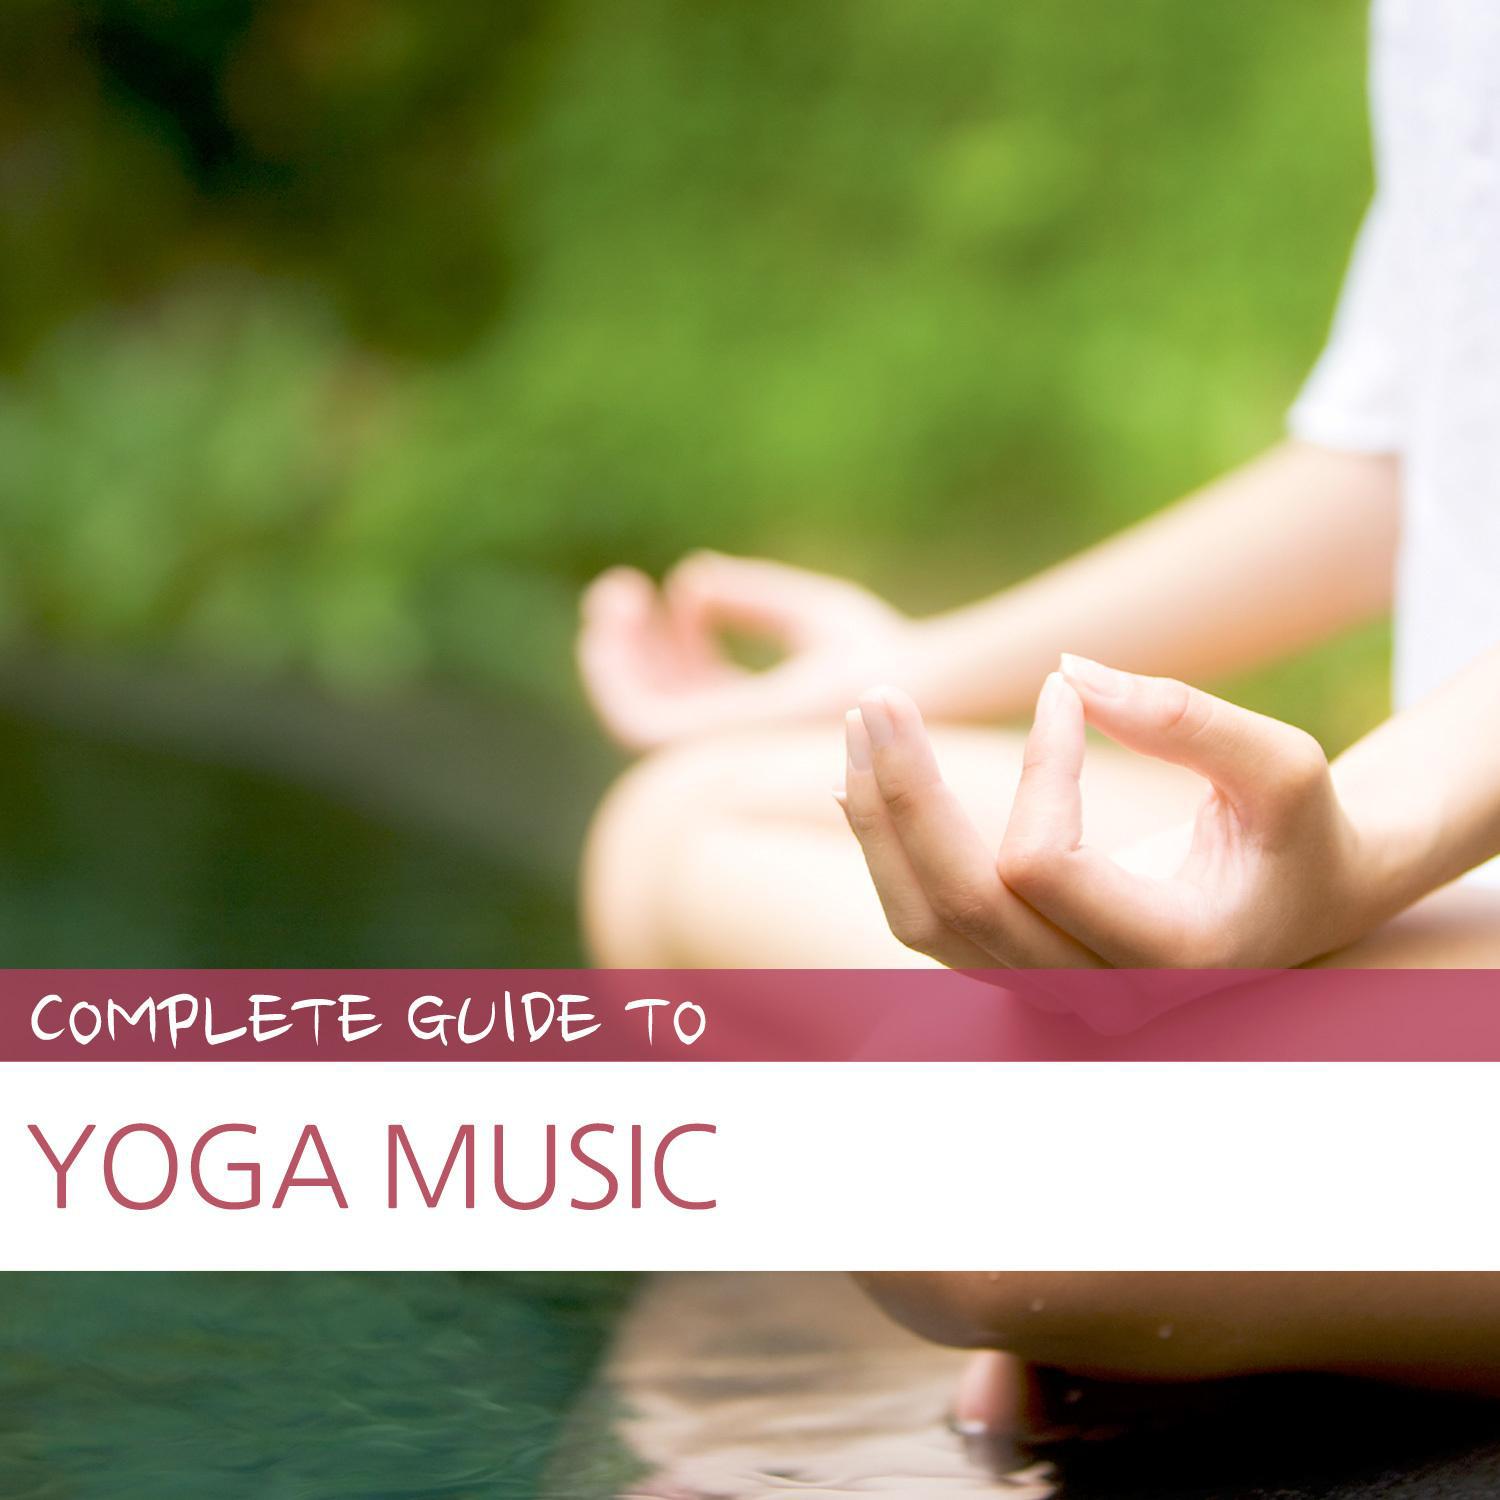 Complete Guide to Yoga Music